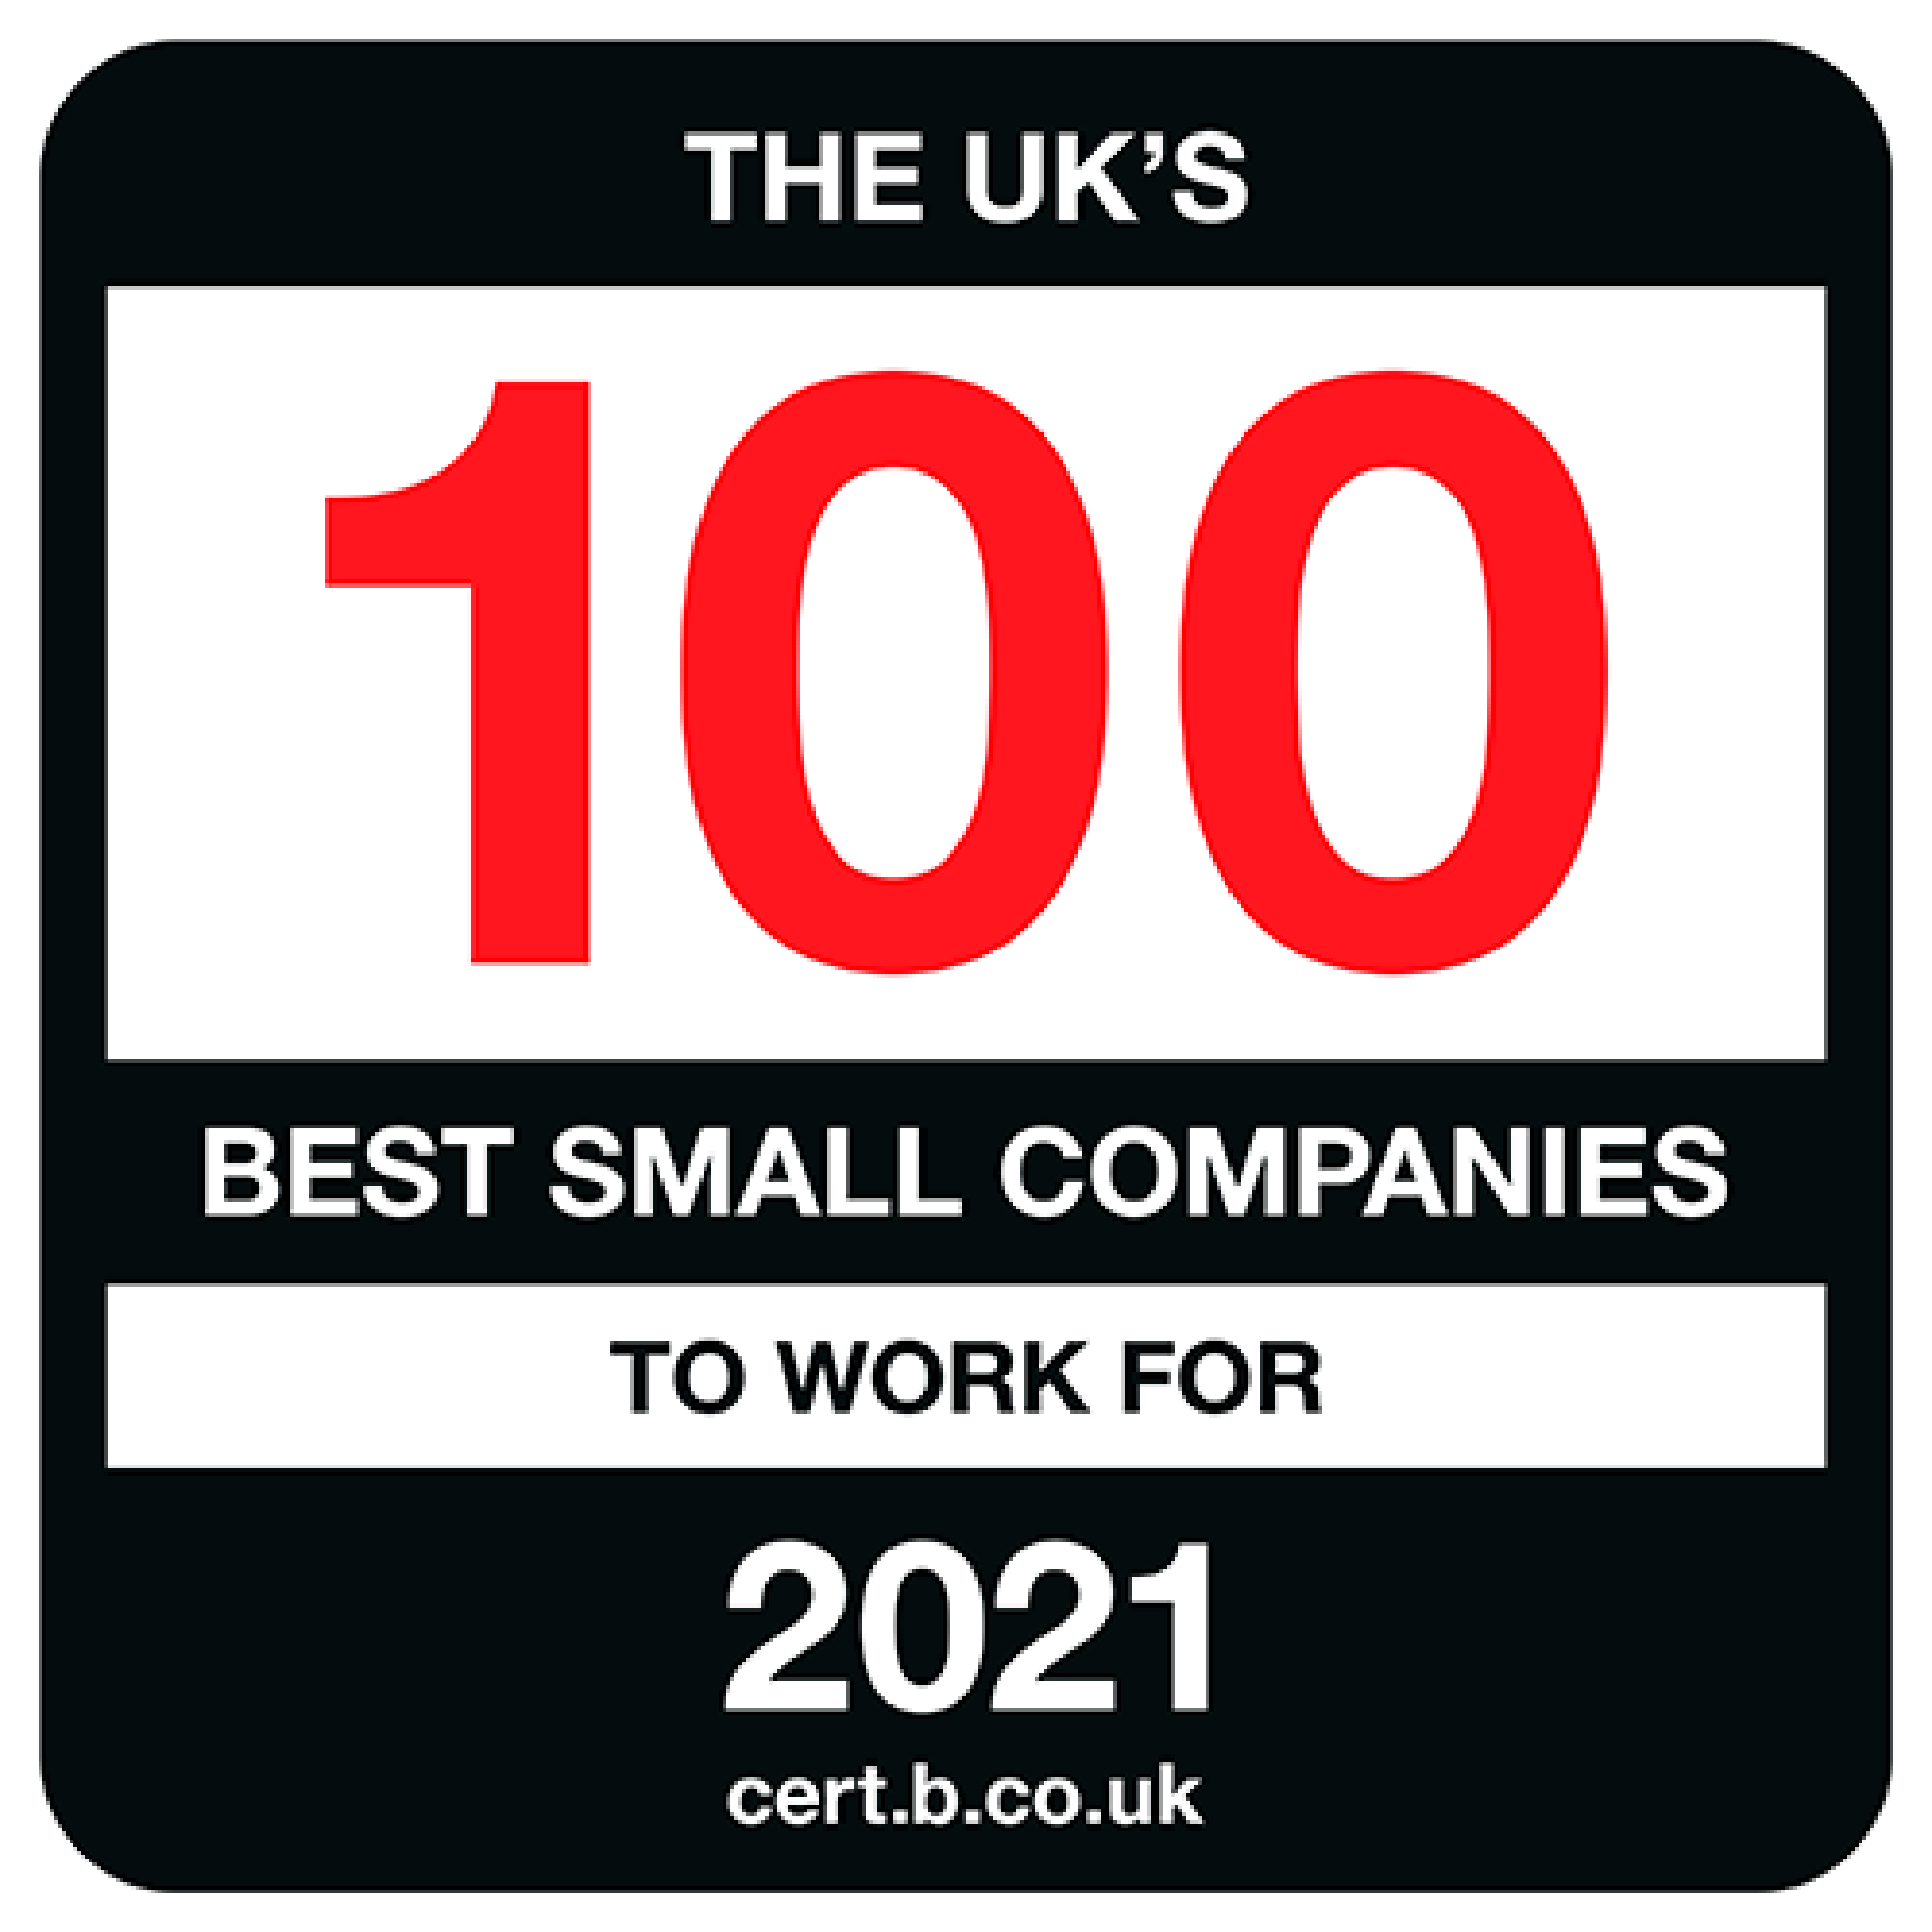 cert.b.co.uk - The Uk's 100 Best Small Companies to Work For in 2021